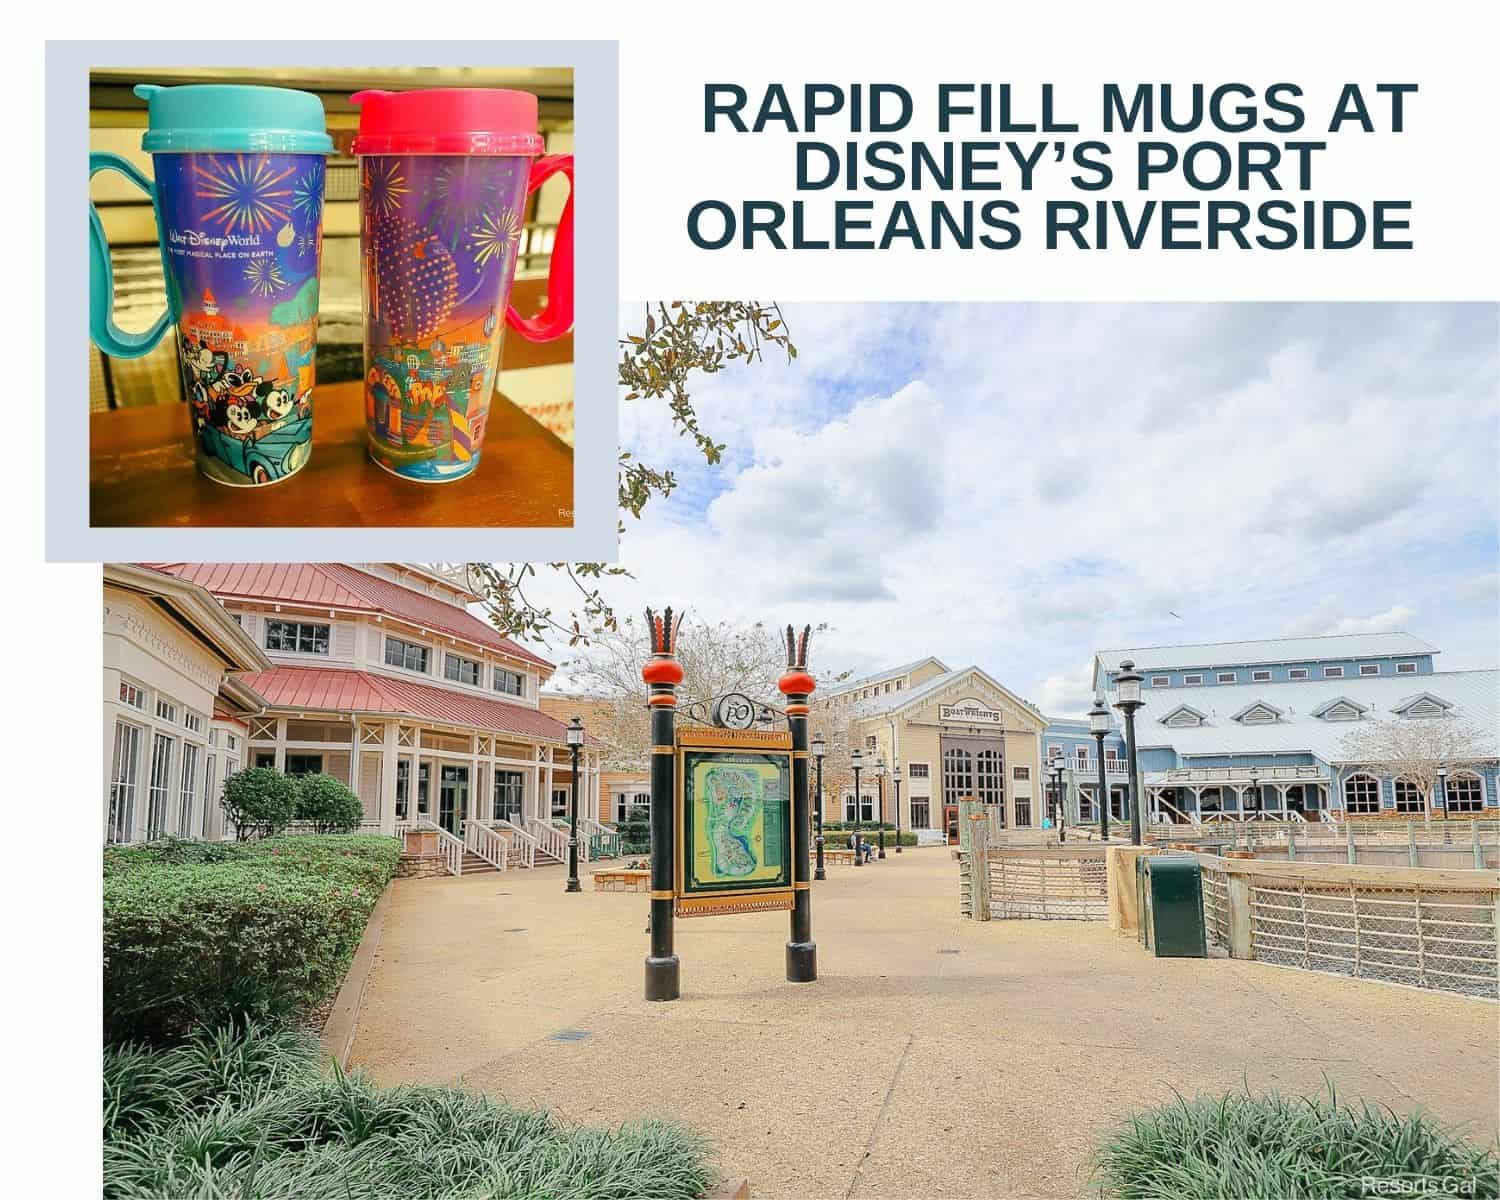 Where to Refill Rapid Fill Mugs at Disney’s Port Orleans Riverside